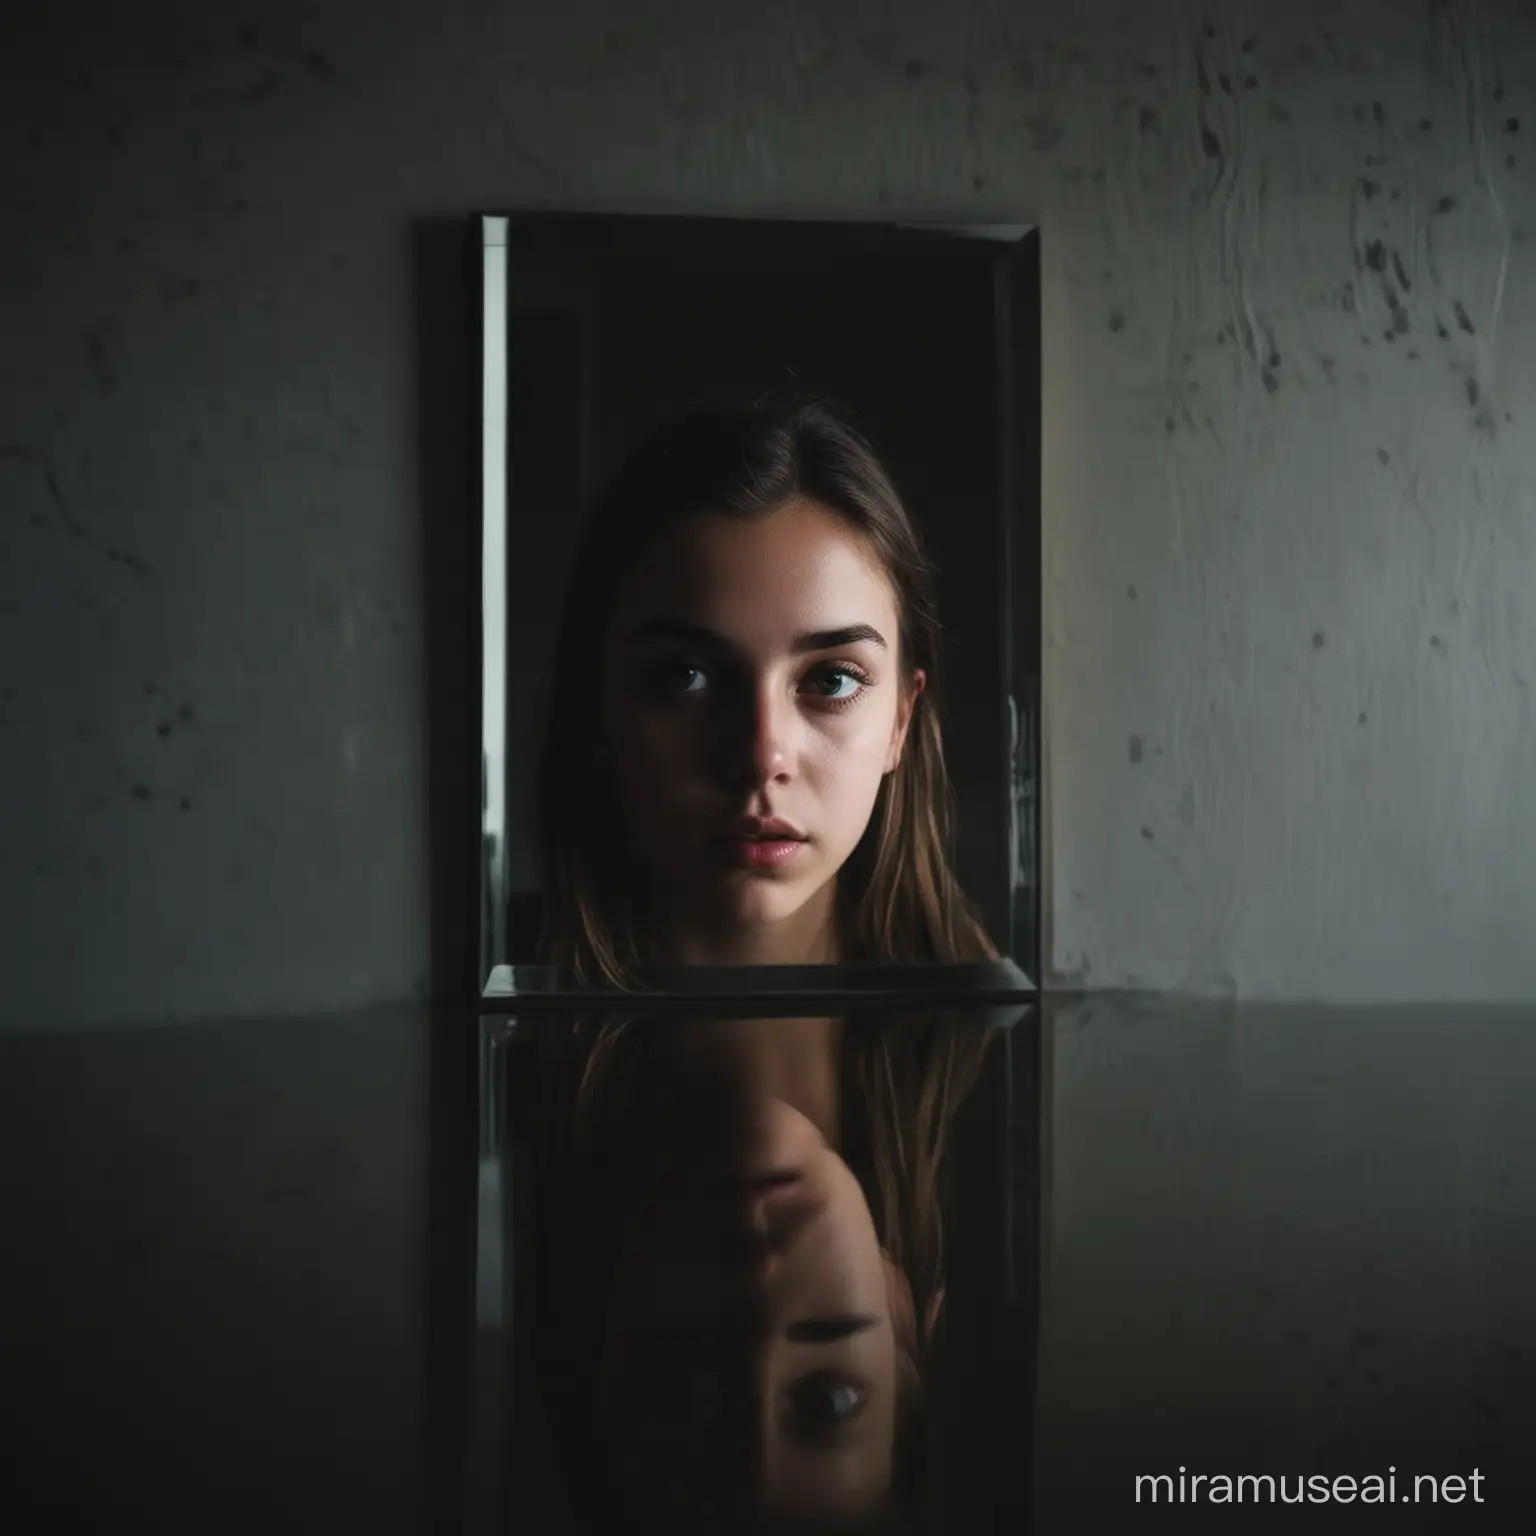 dark mirror reflection with girl in it